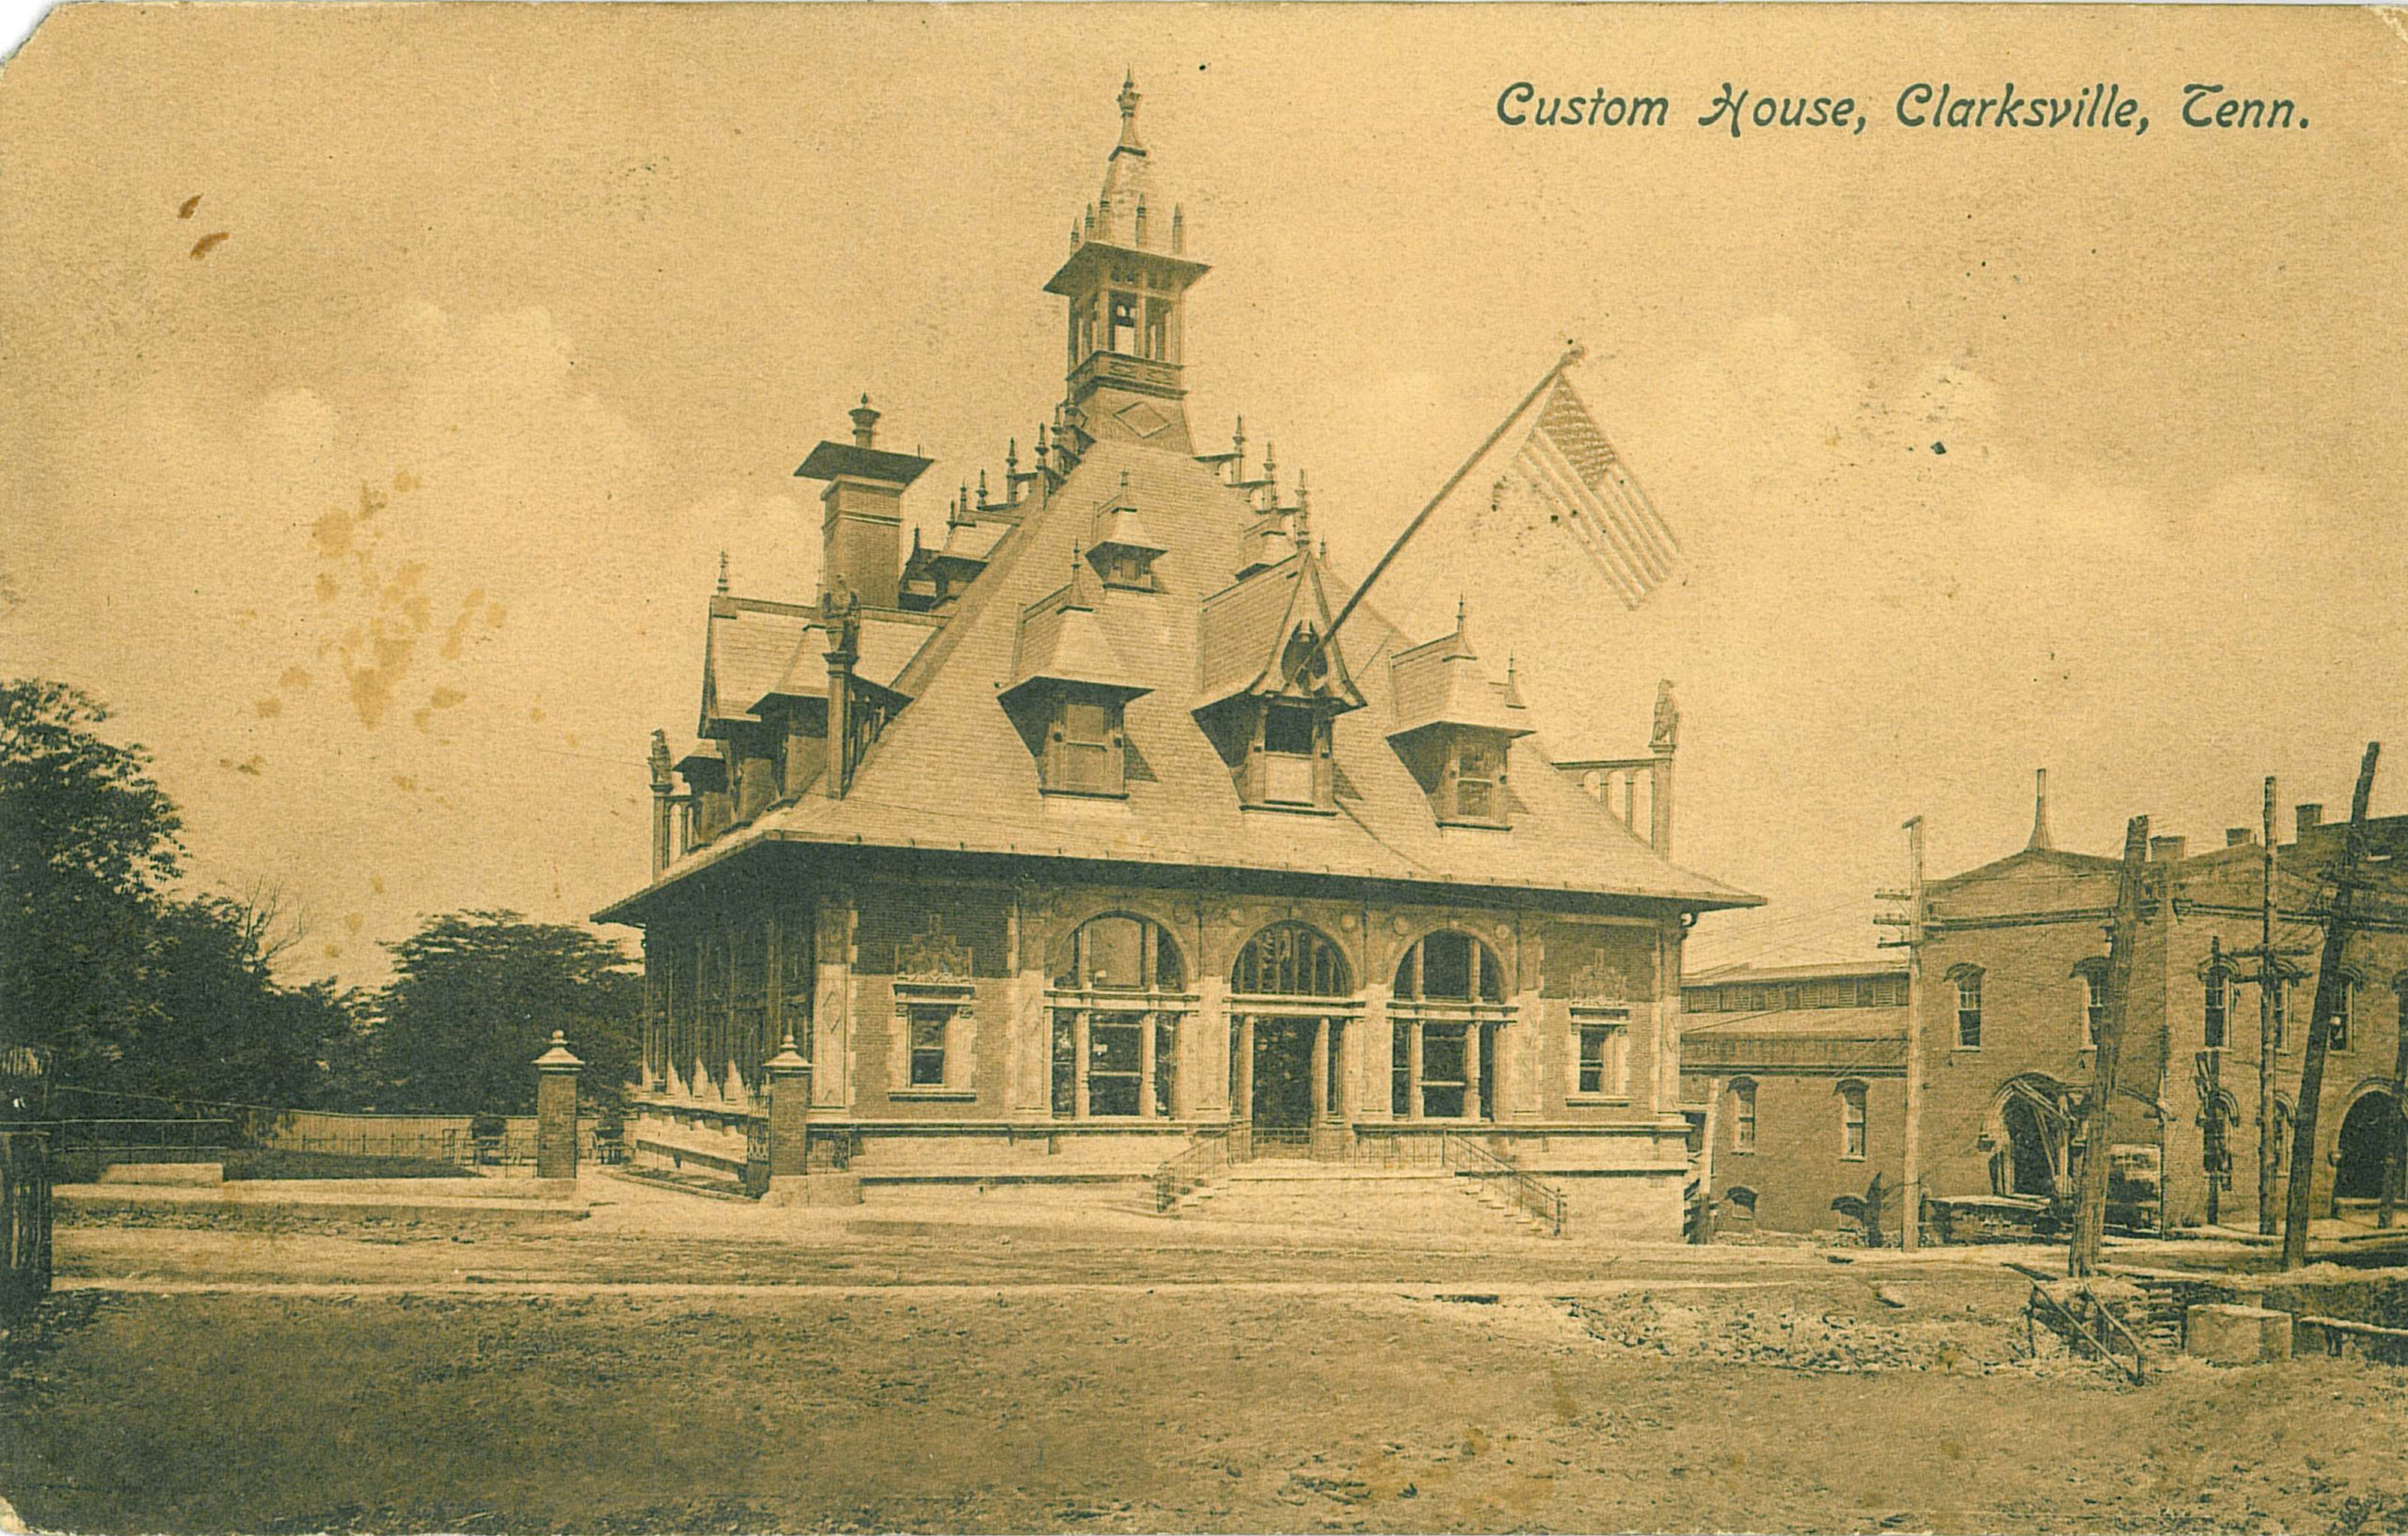 Antique photo postcard of the Customs House Museum building